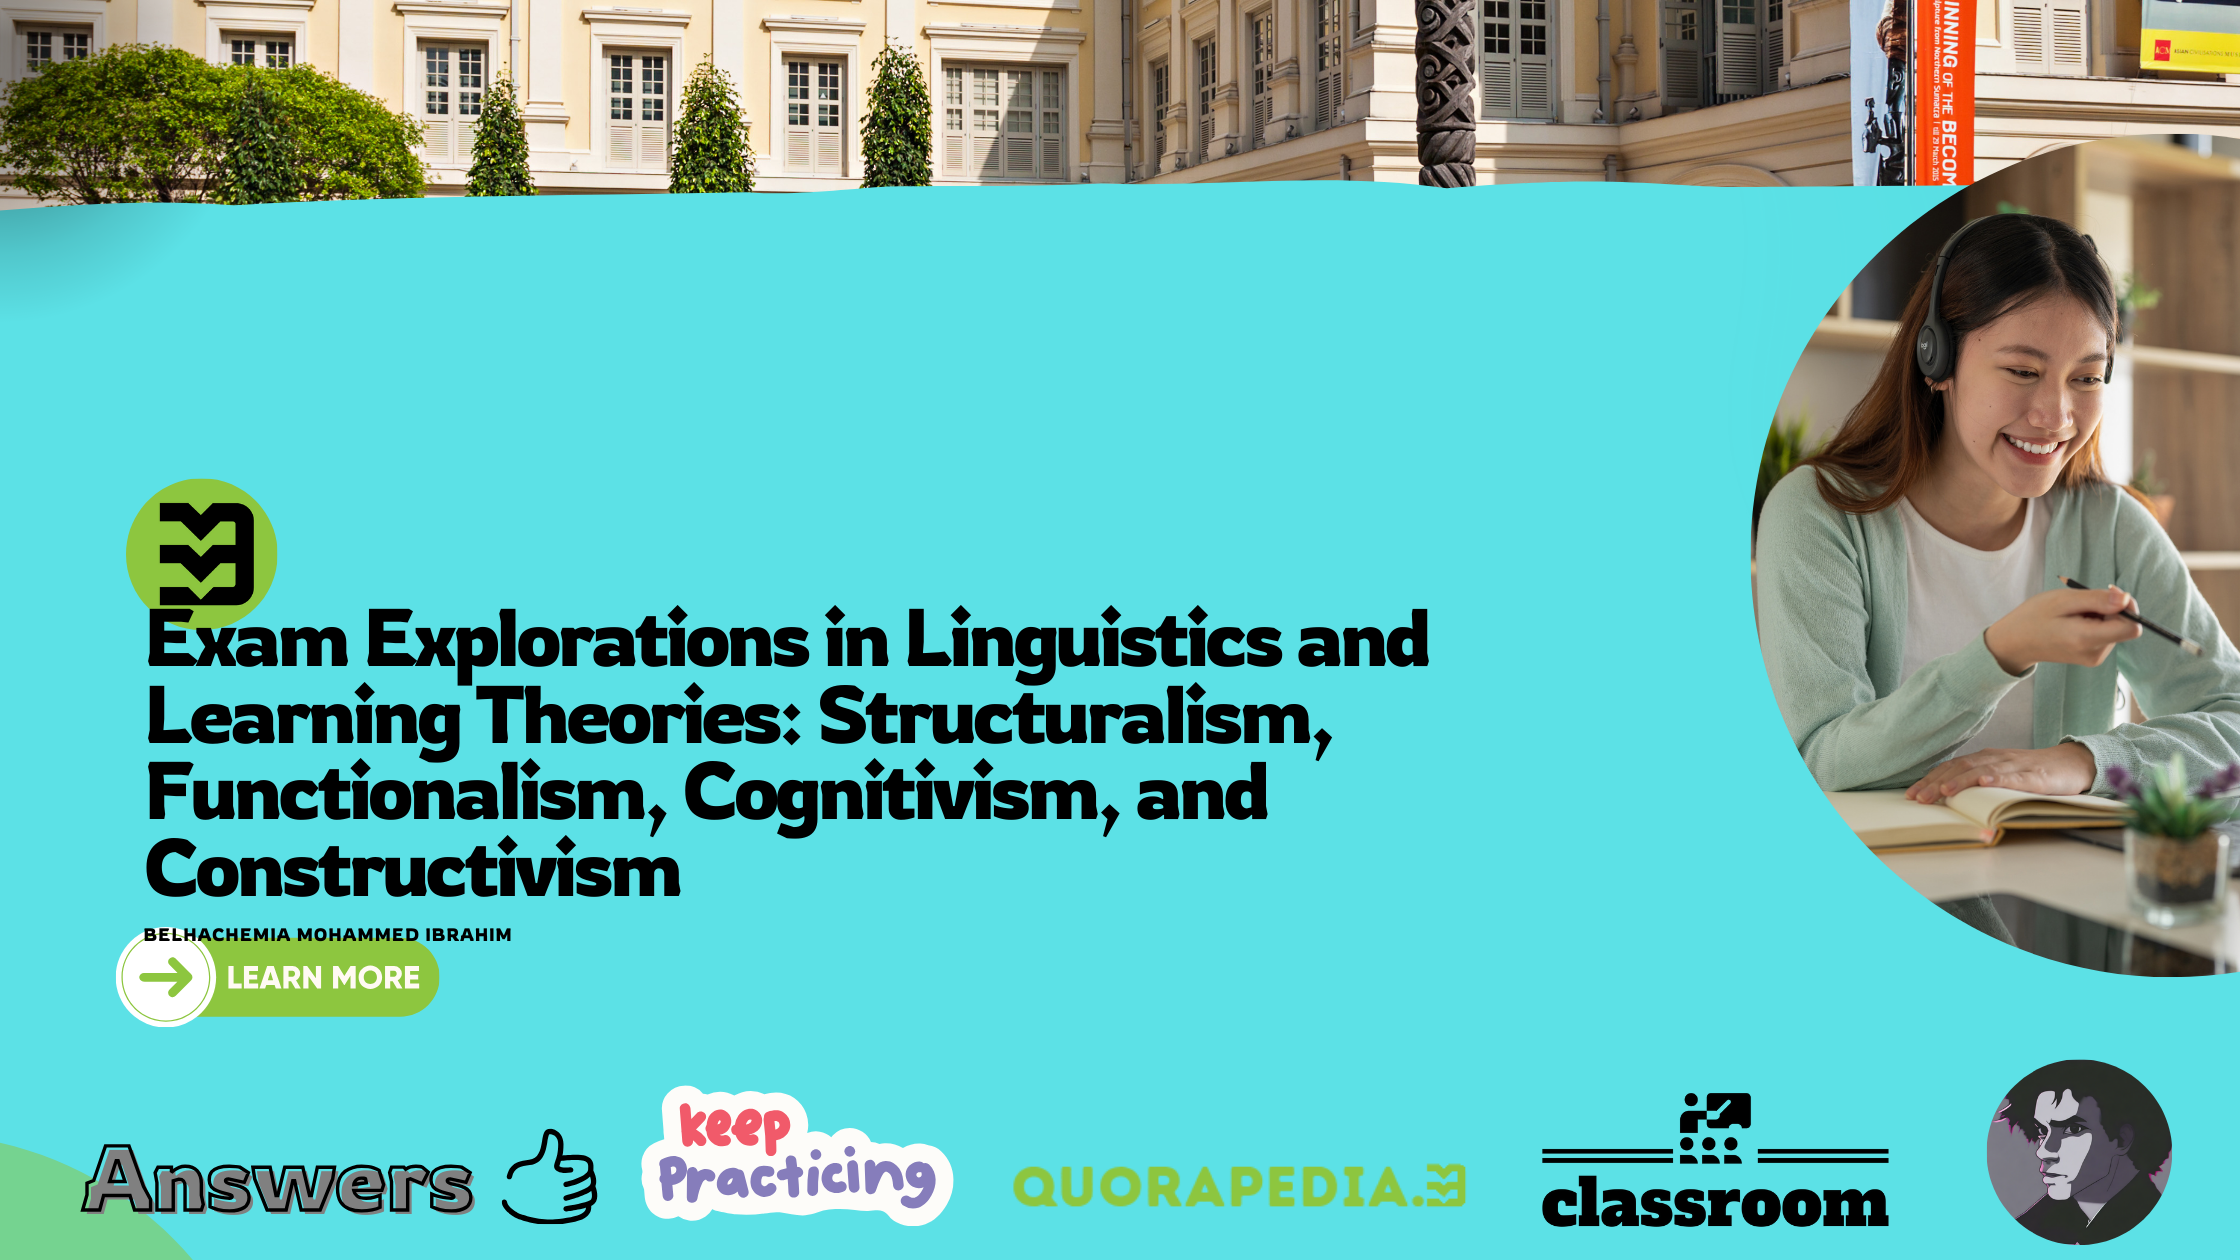 Exam Explorations in Linguistics and Learning Theories: Structuralism, Functionalism, Cognitivism, and Constructivism